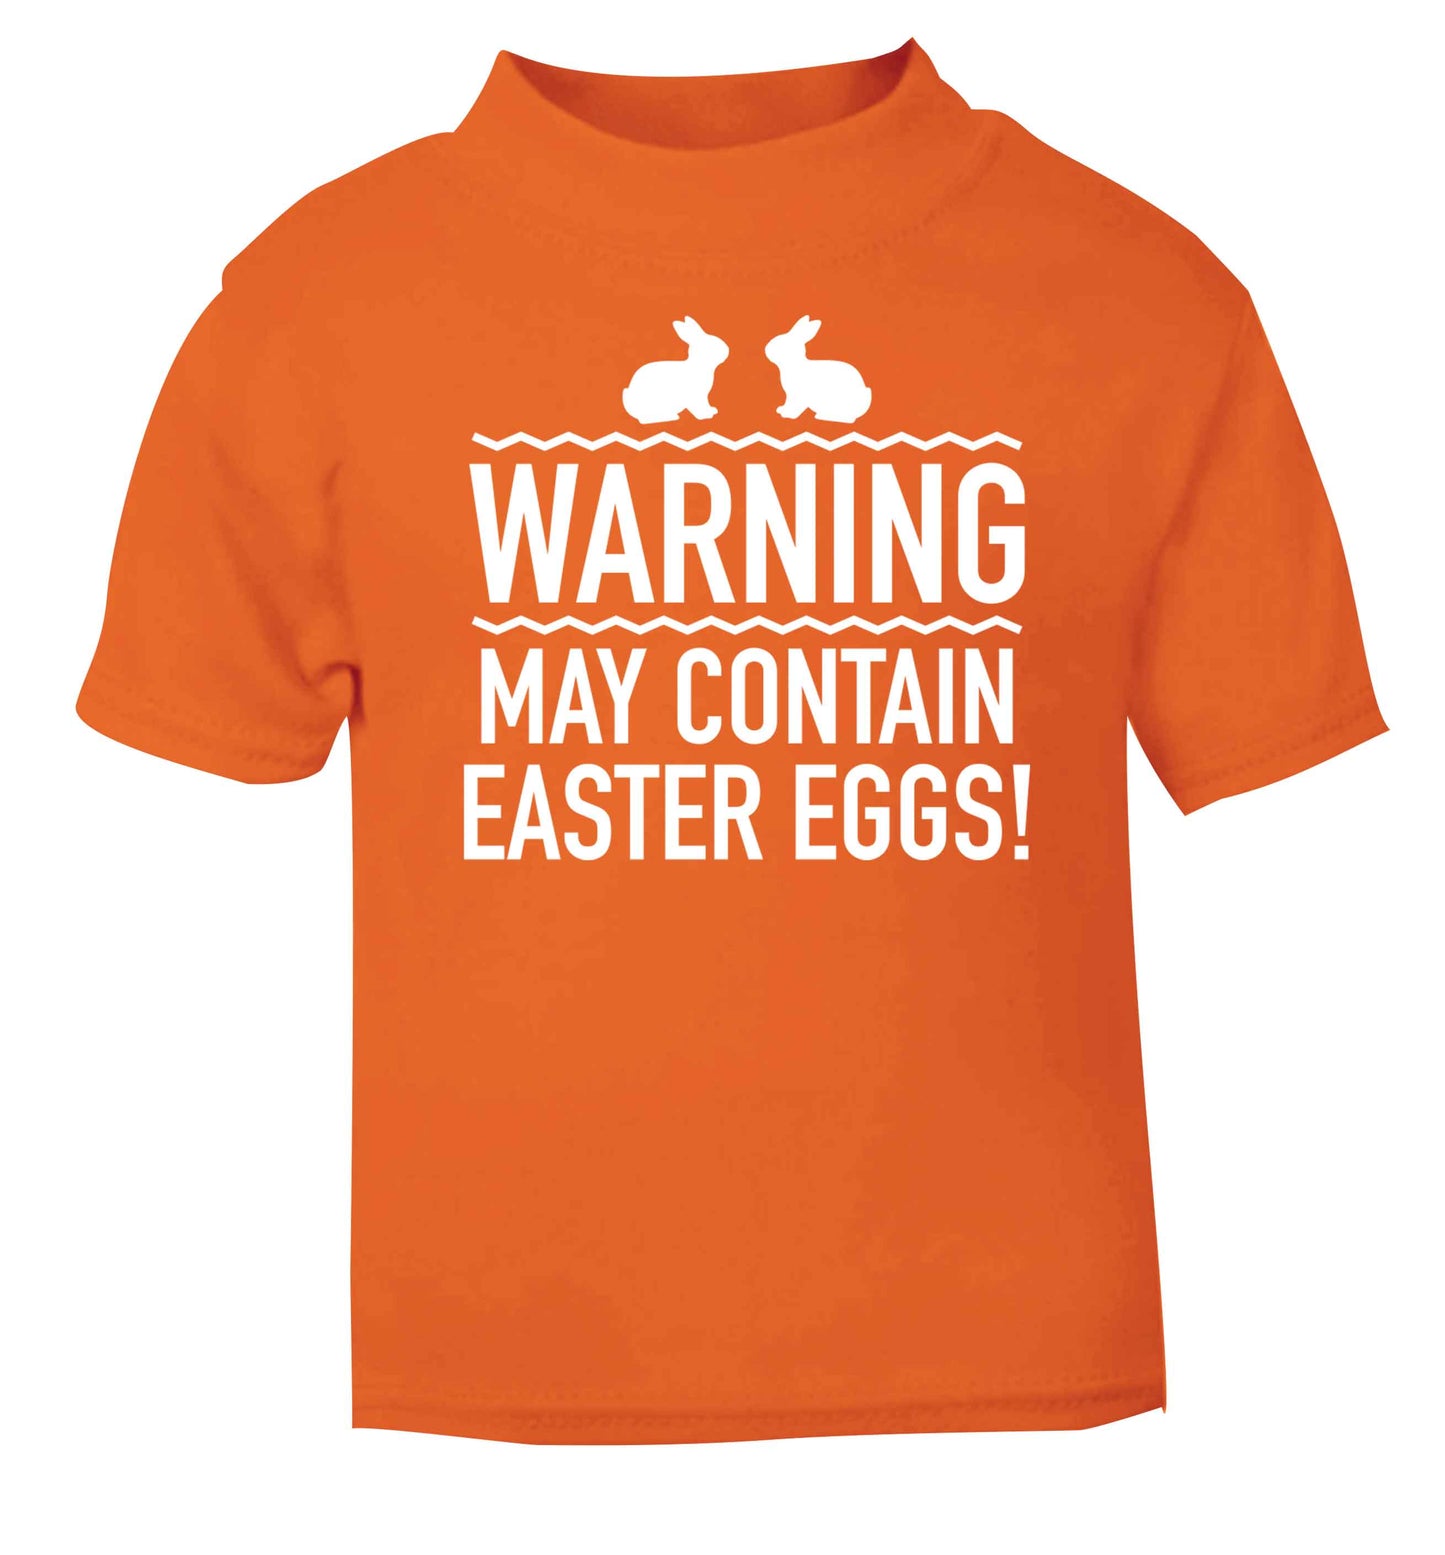 Warning may contain Easter eggs orange baby toddler Tshirt 2 Years